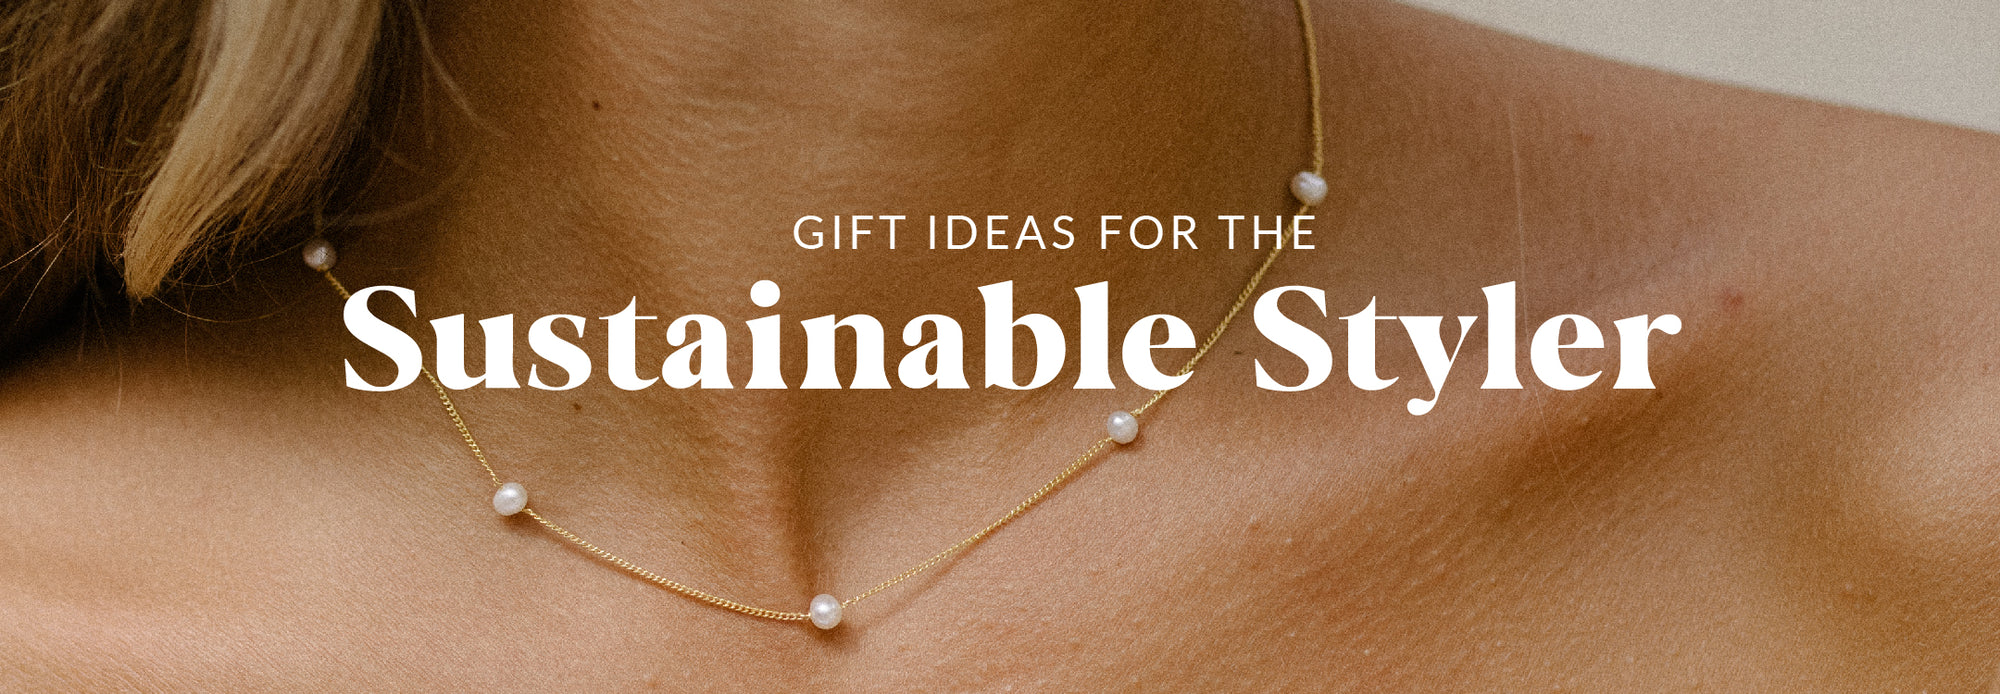 Gift ideas for the Sustainable Styler